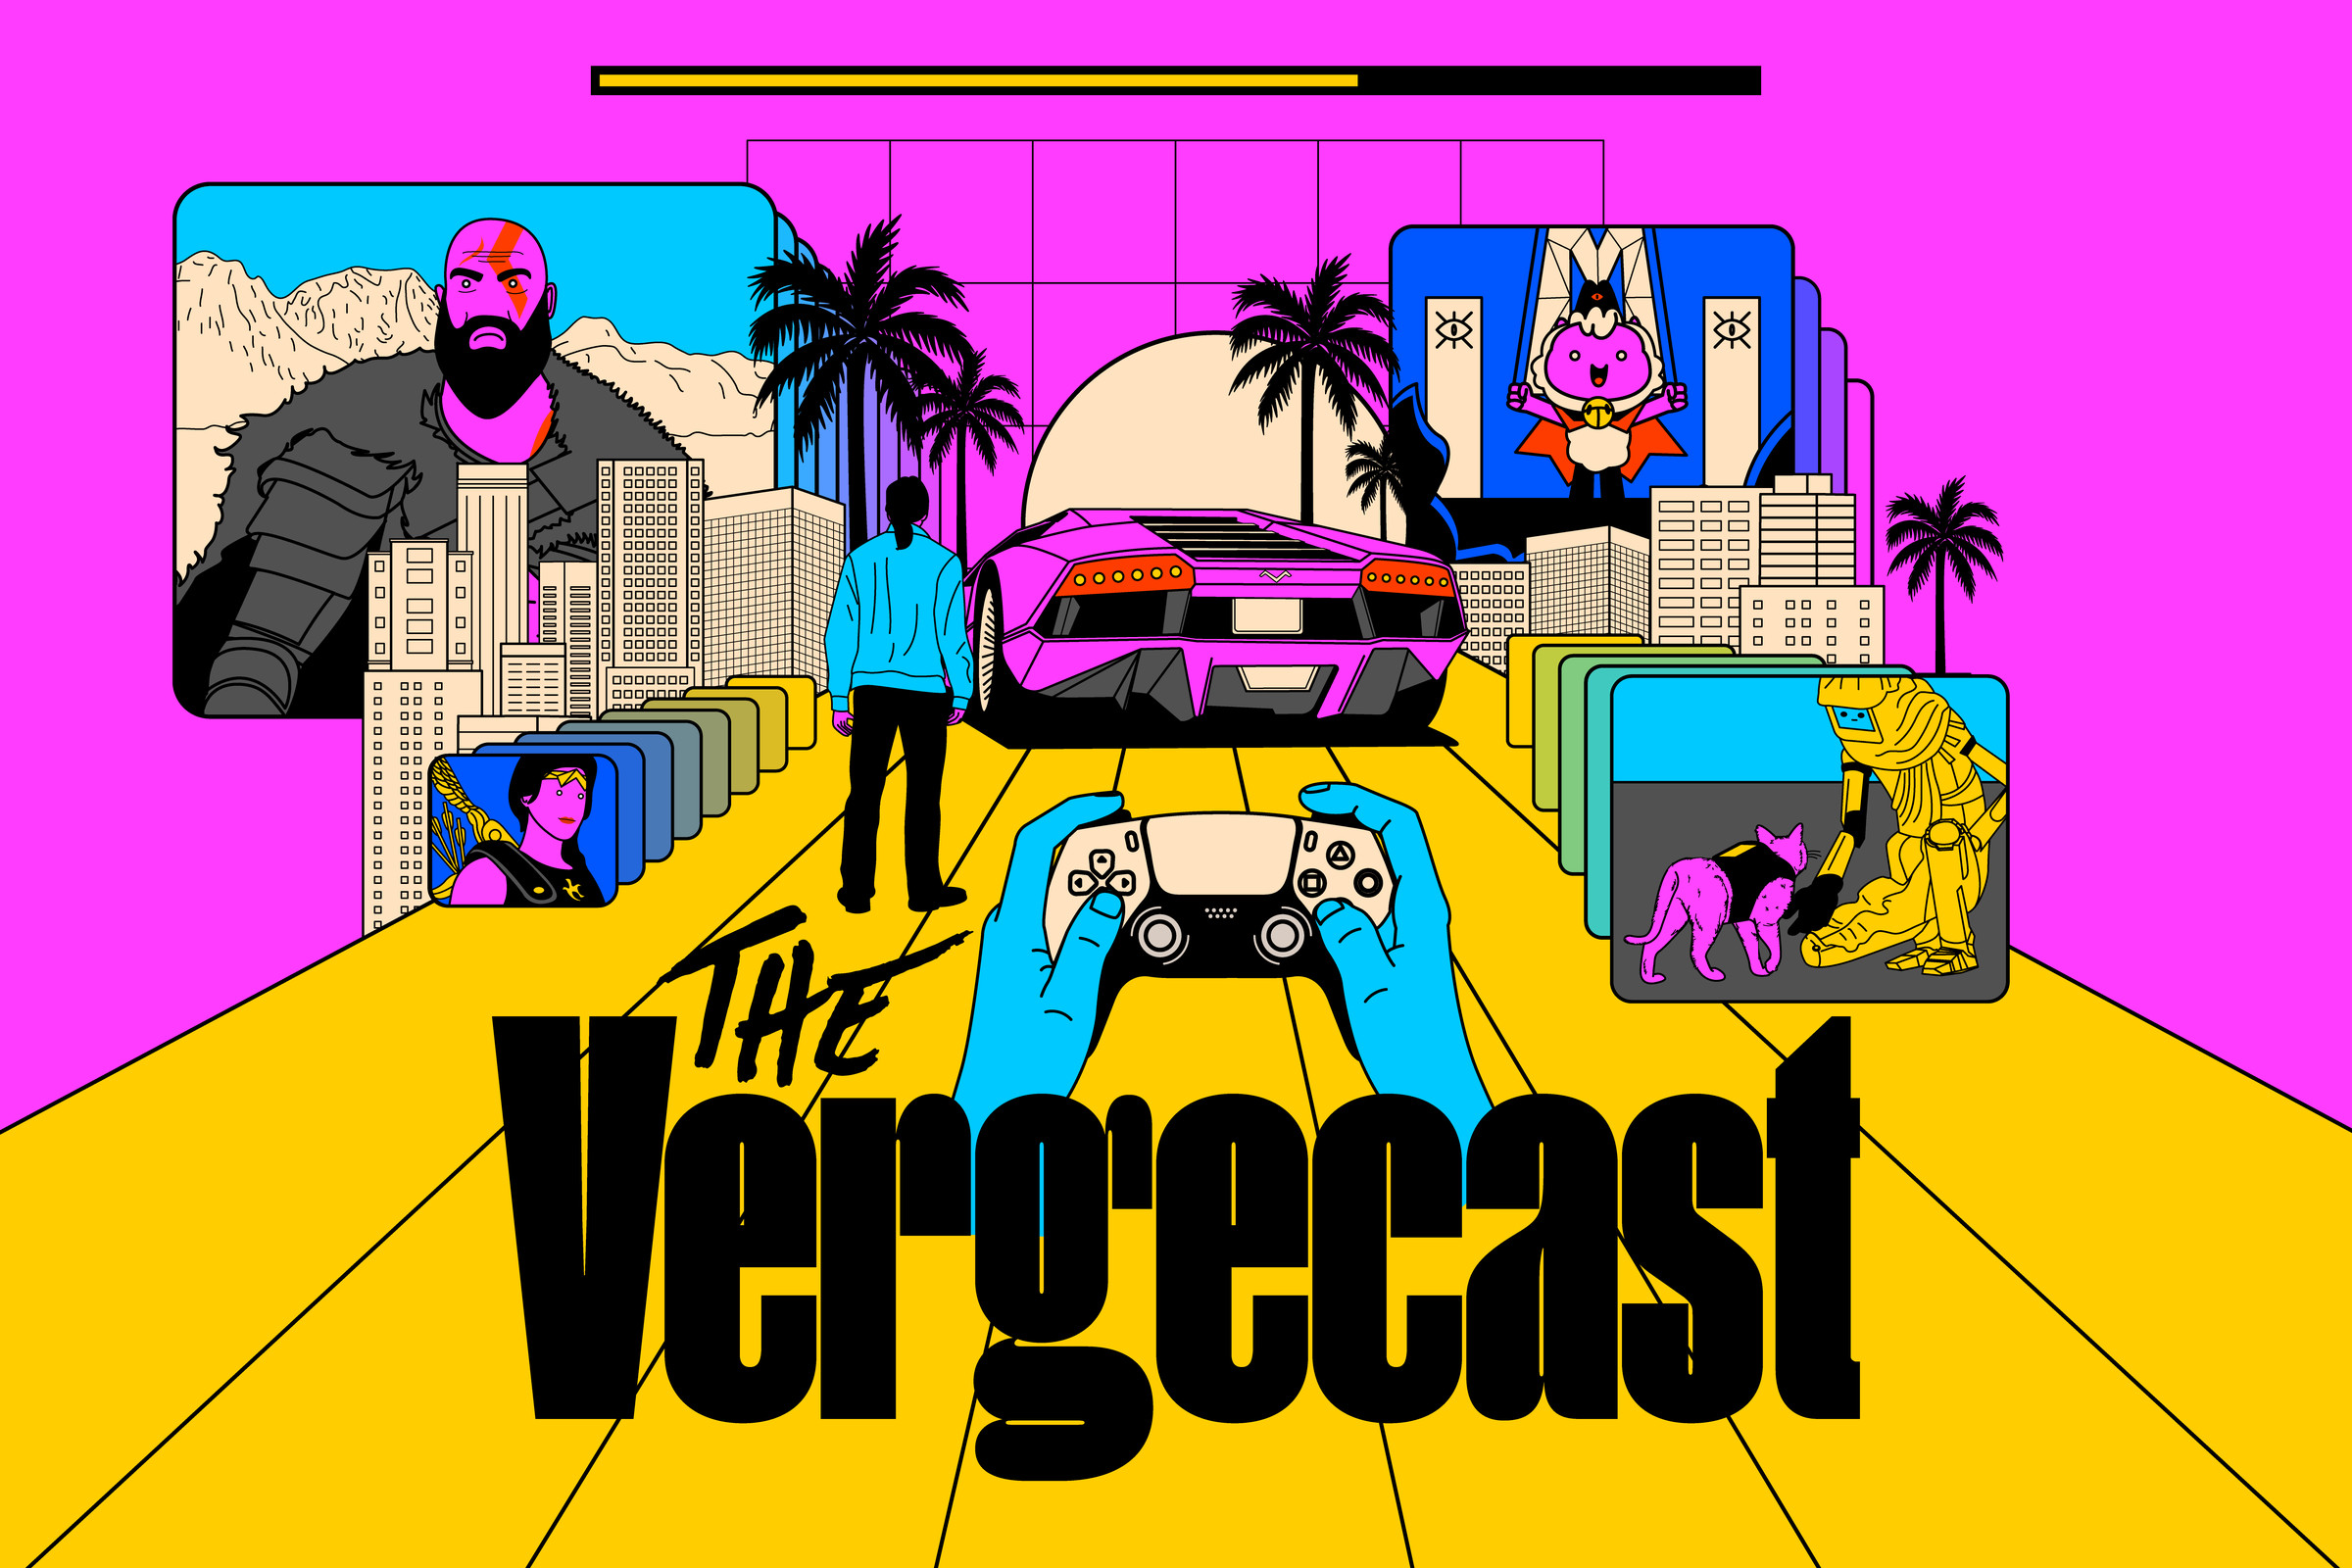 An illustrated version of the Vergecast logo, with screenshots from games.